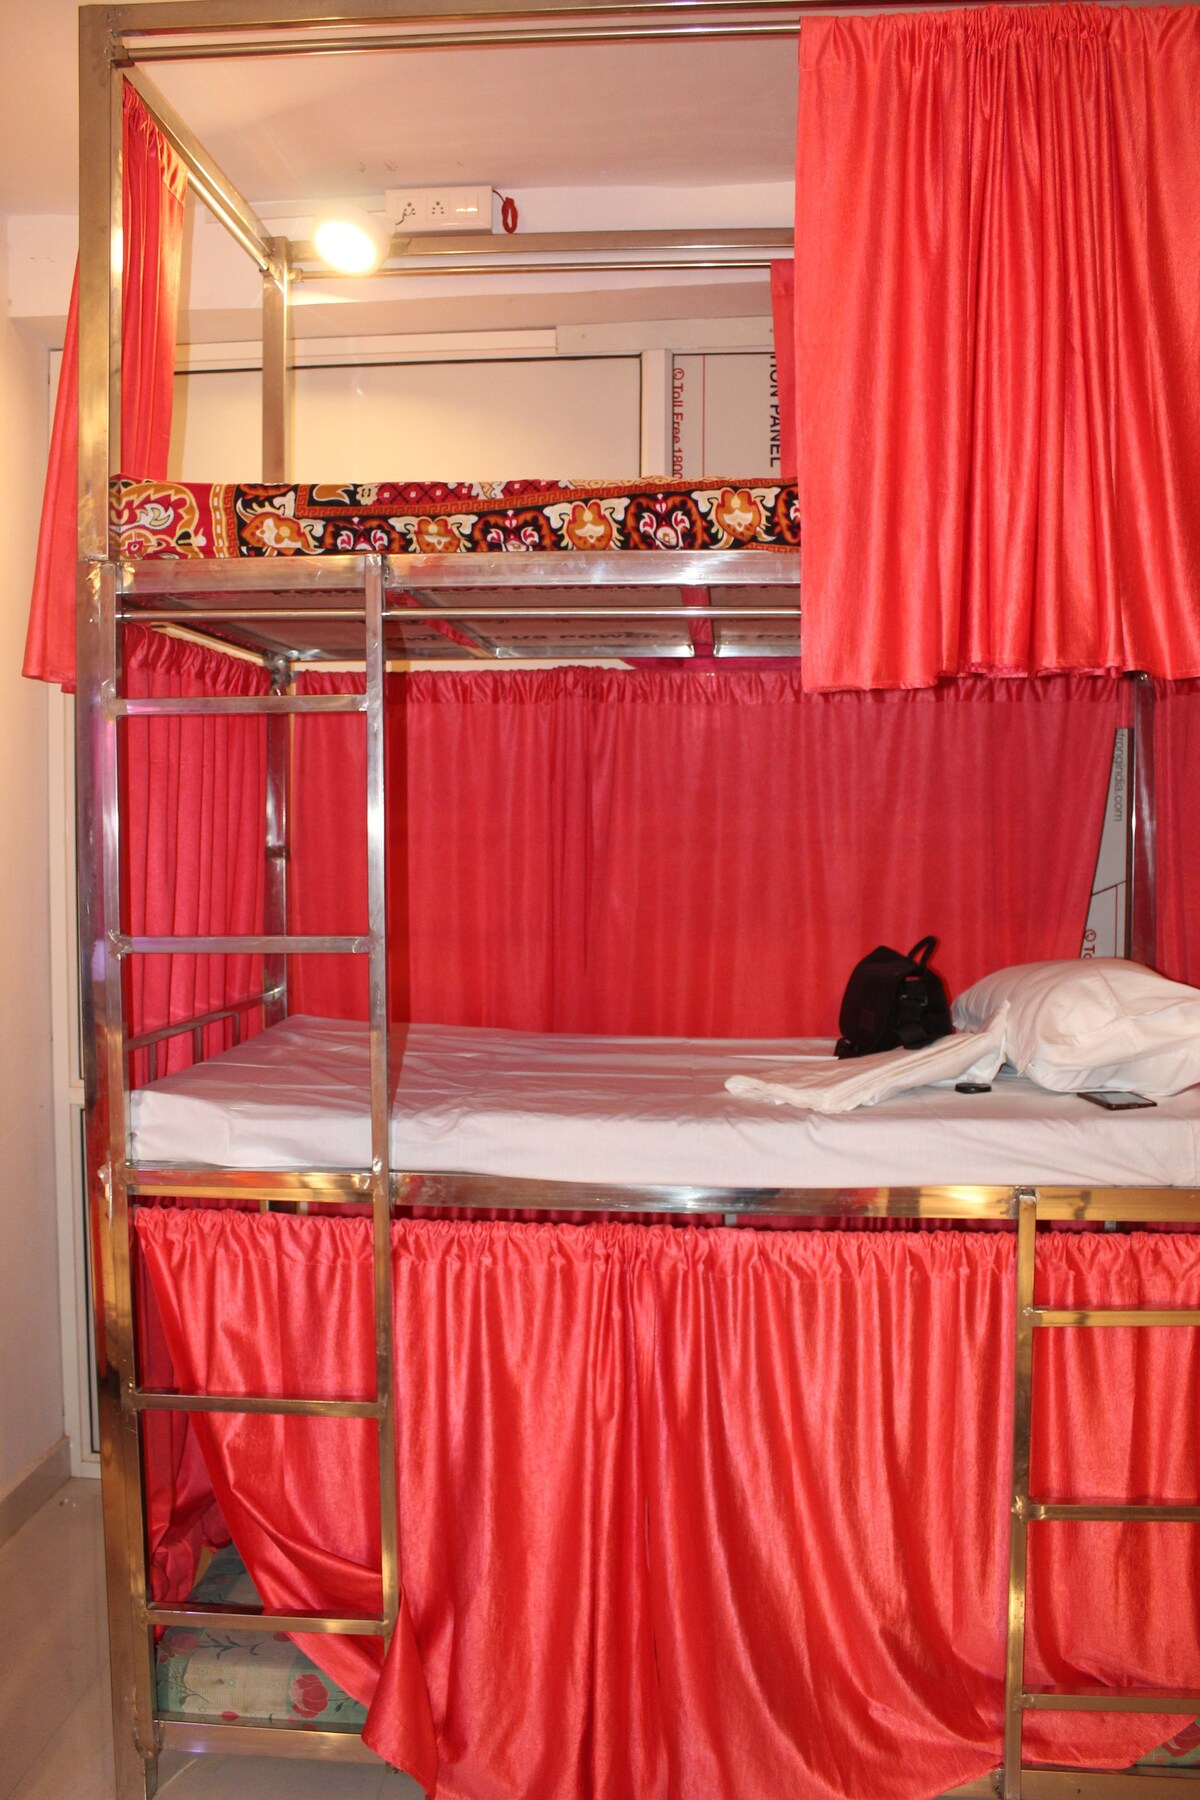 Sharing 5 bunk-beds at Sunset Backpackers hostel.